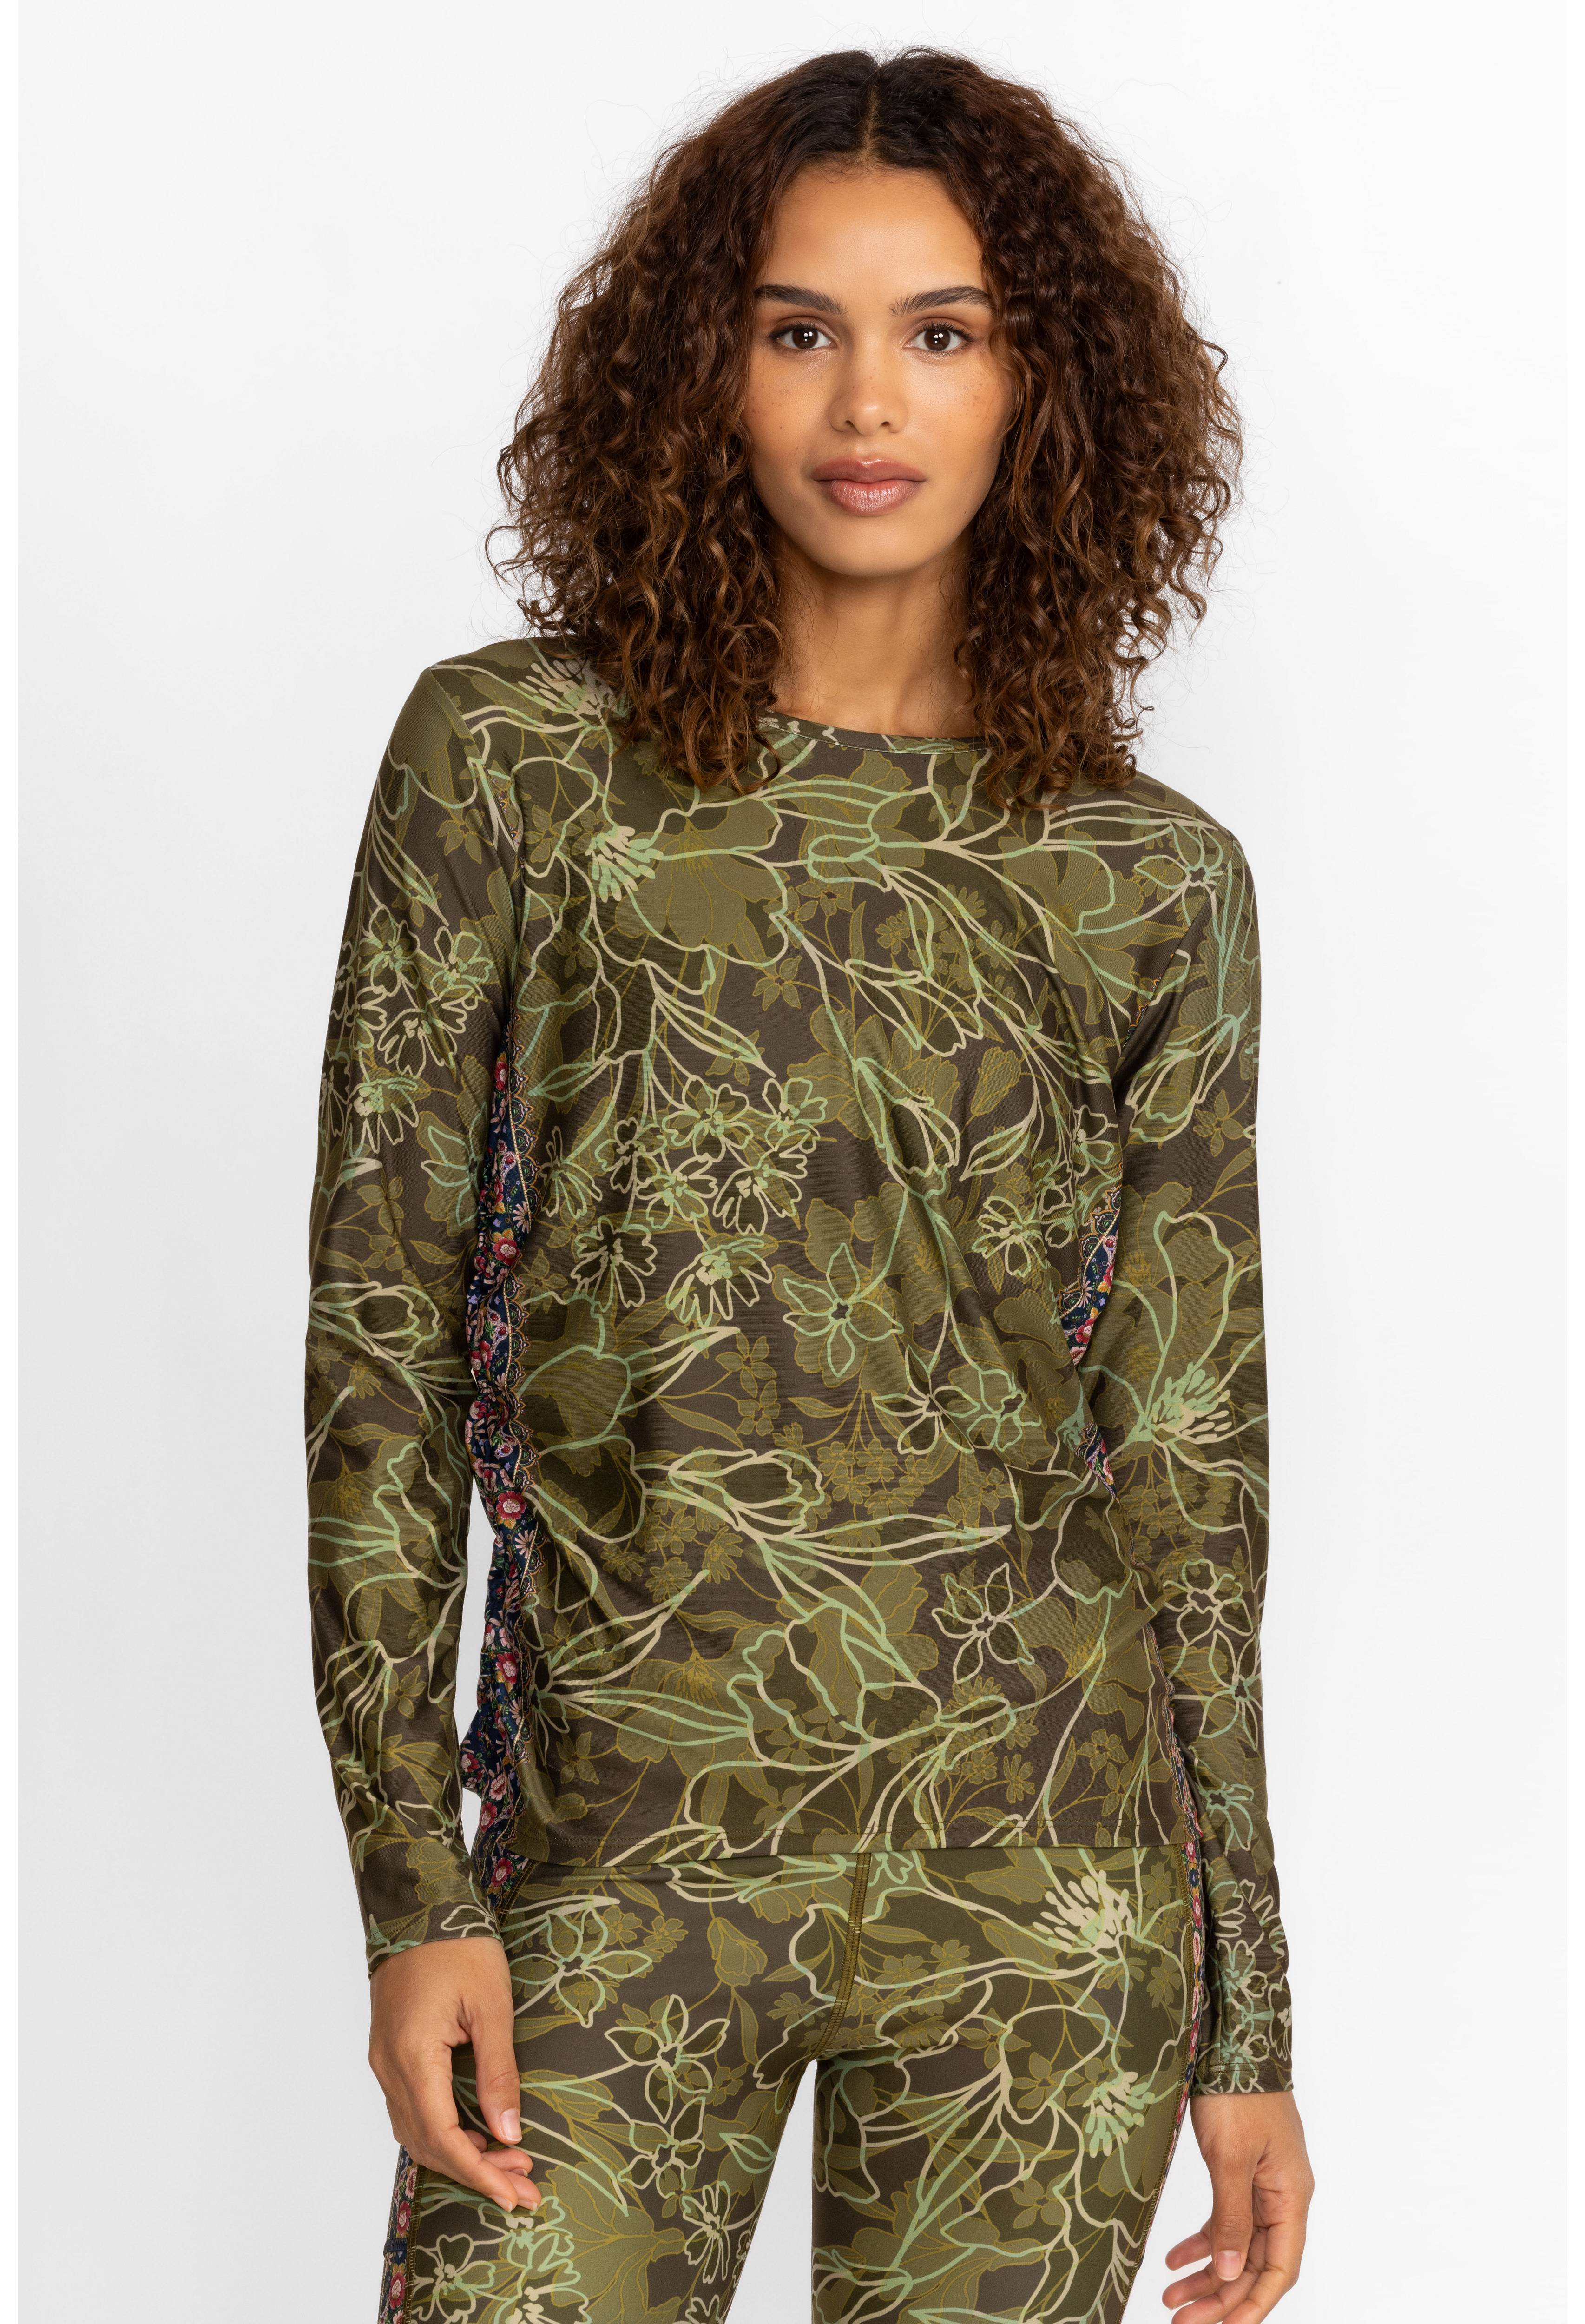 HIRZ CAMO RUCHED LONG SLEEVE TOP, , large image number 2